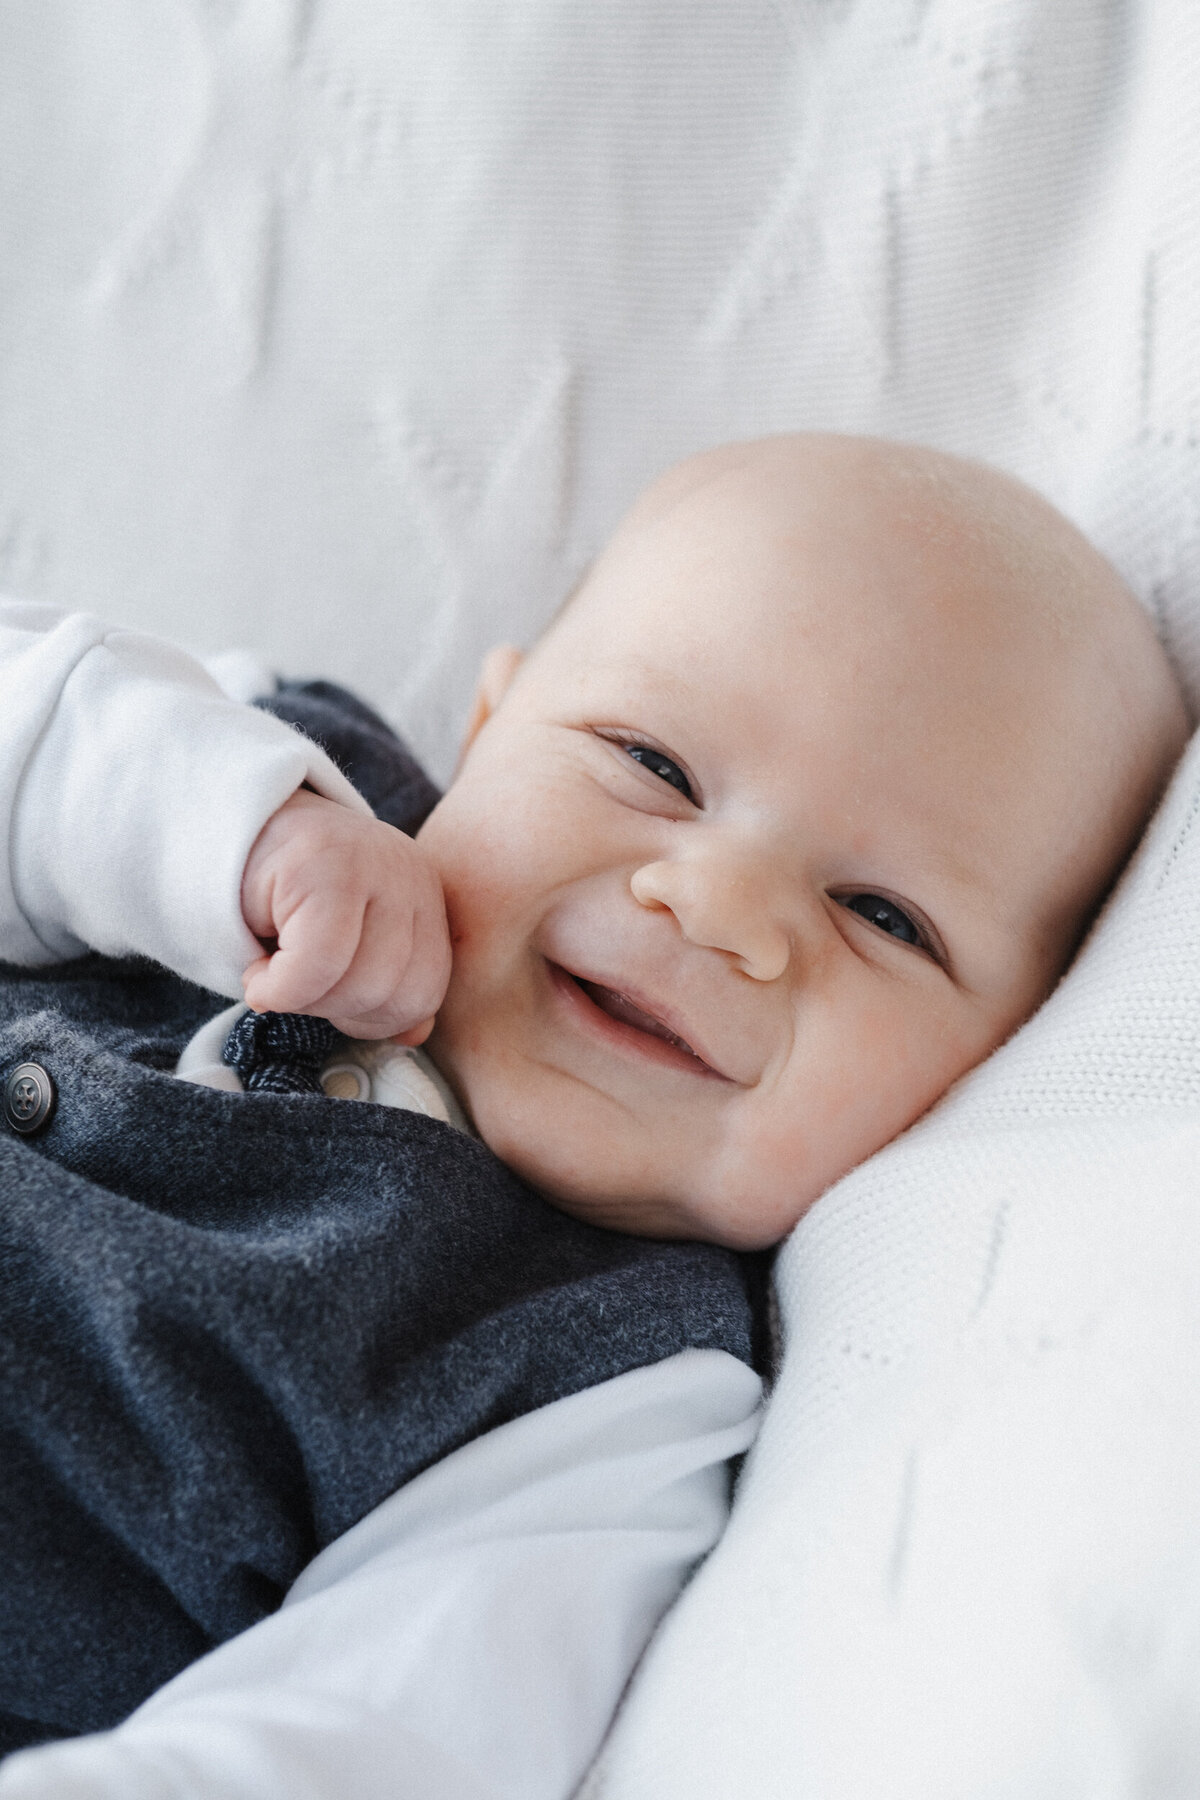 Grinning baby holds fist to his face while smiling and laying on white blanket